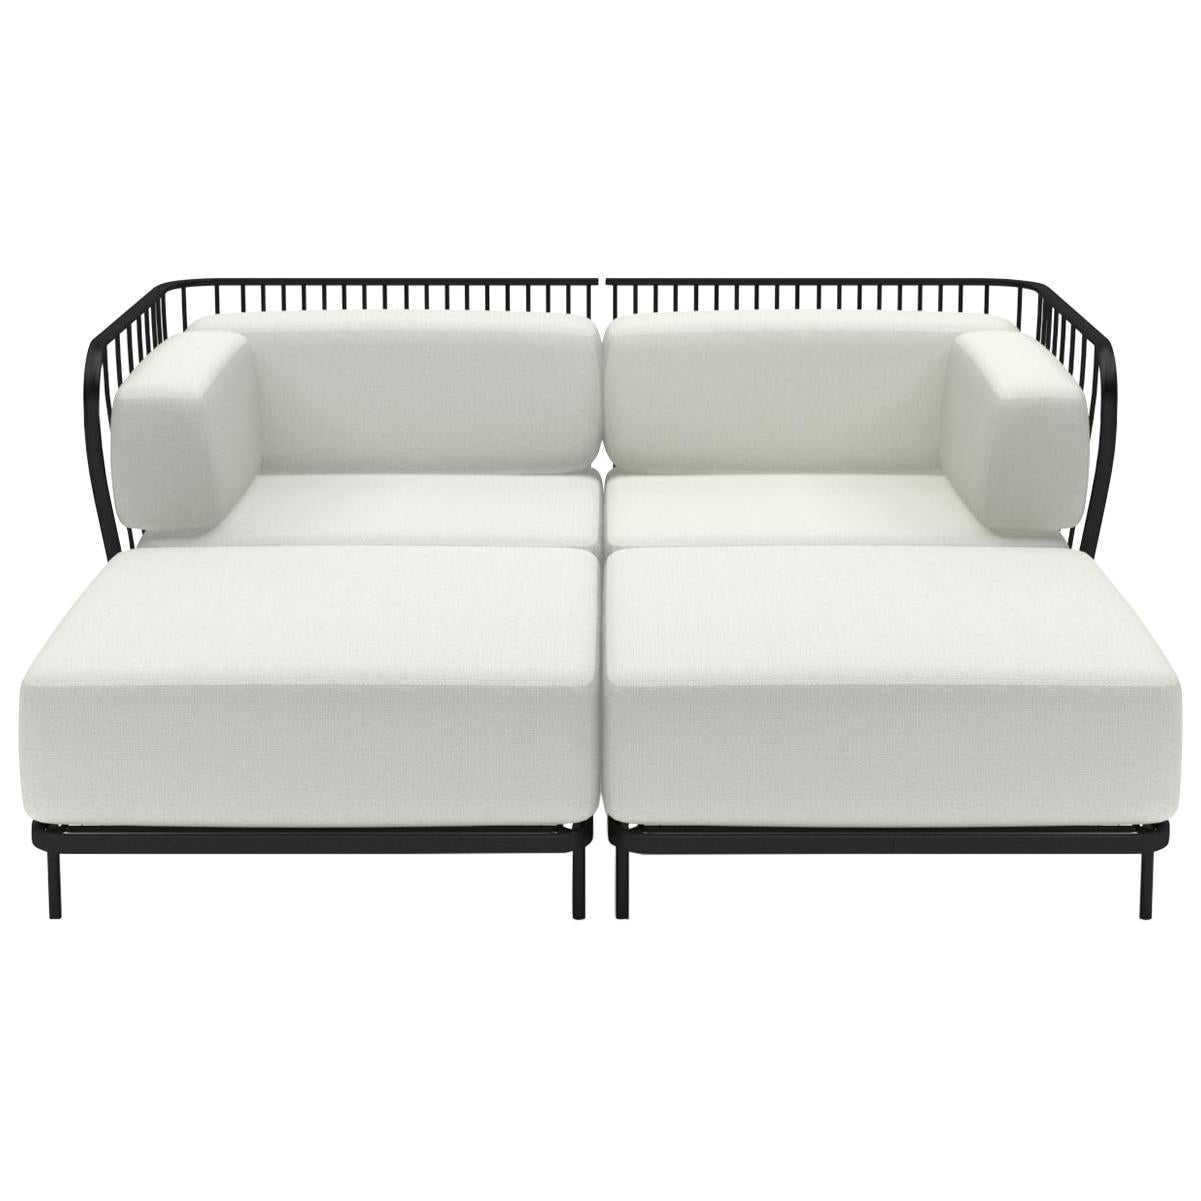 EMU Steel Cannolè Double Daybed For Sale